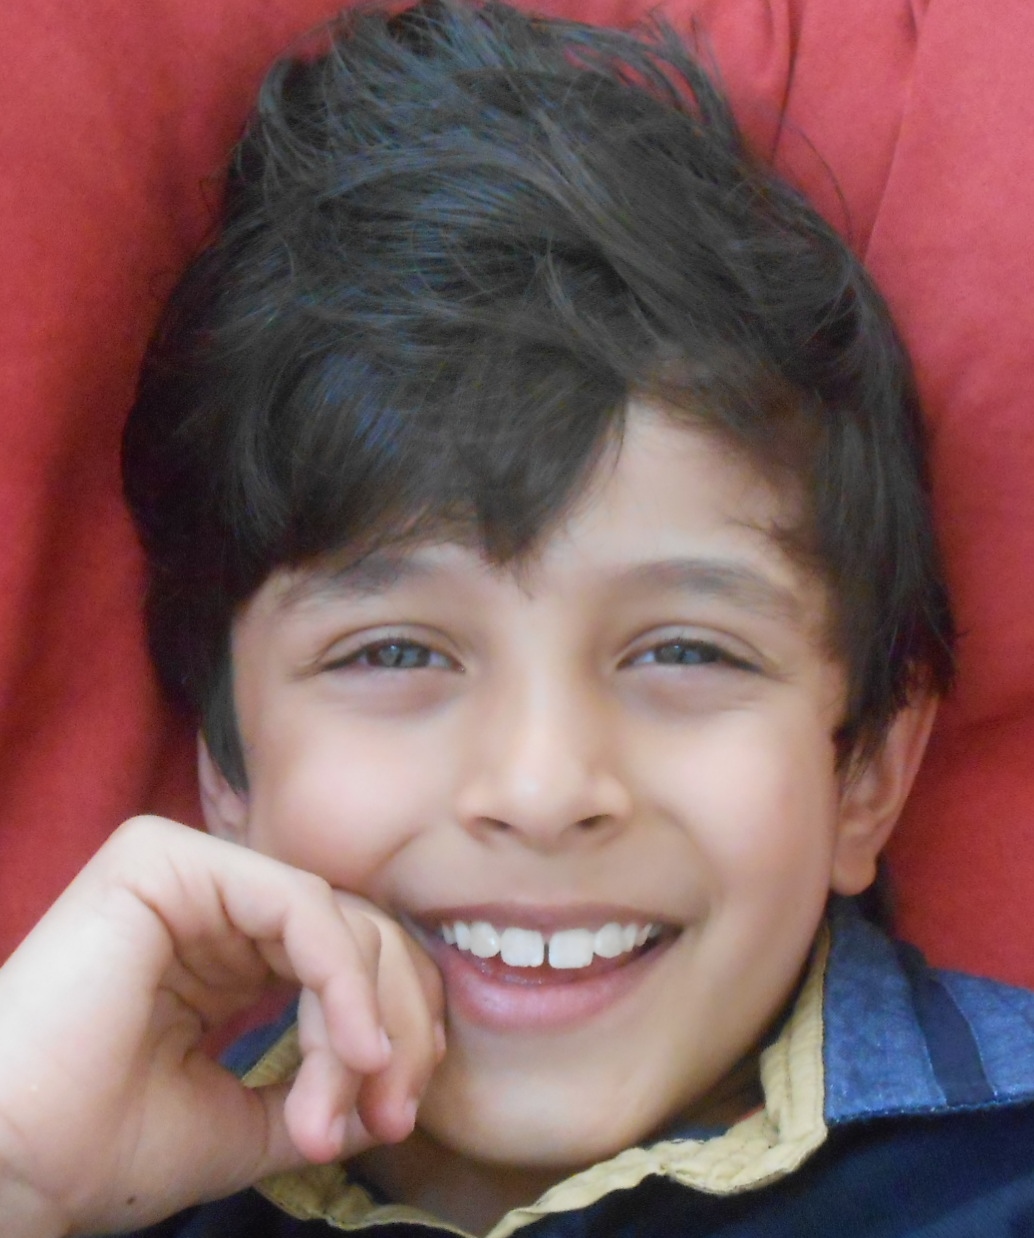 My son.He has sung an English song for a feature film and also done a guest appearance in another feature film. His FB page is..https://www.facebook.com/Arthurbabuantony?ref=hl